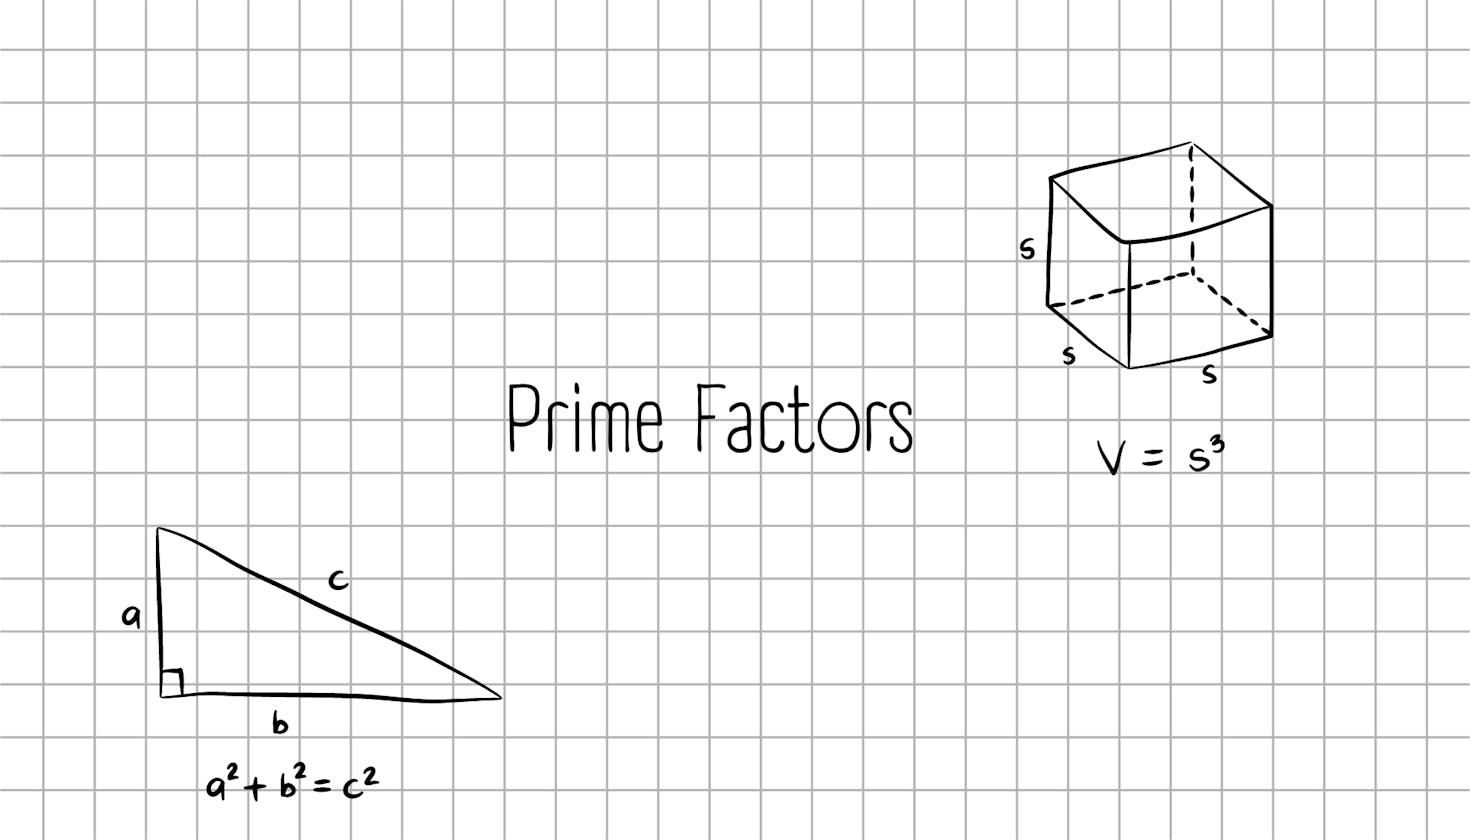 How to print prime factors of a number efficiently